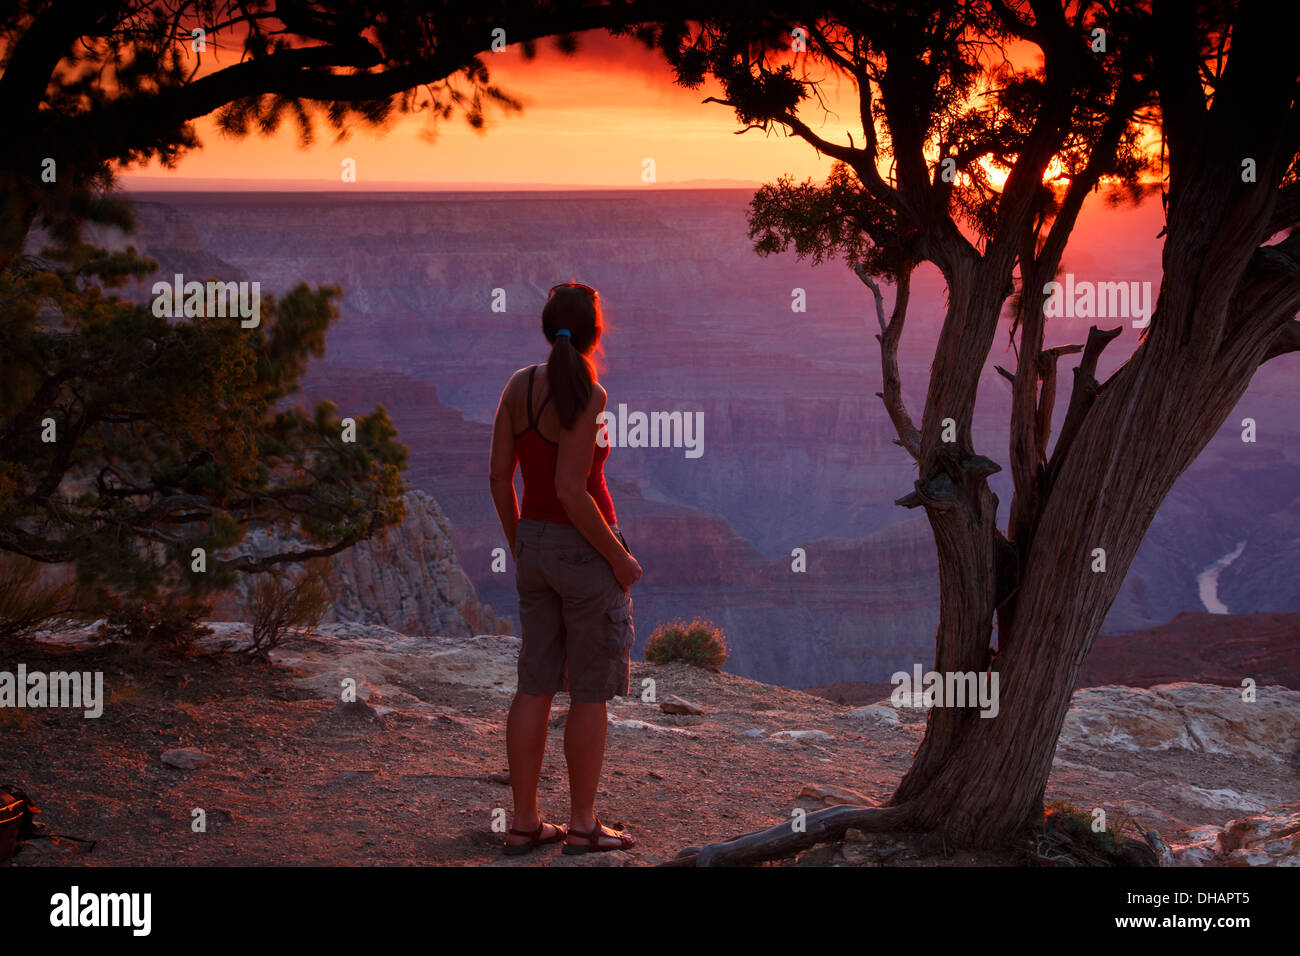 A visitor takes in the sunset at Hopi Point, South Rim, Grand Canyon National Park, Arizona. (Model Released) Stock Photo